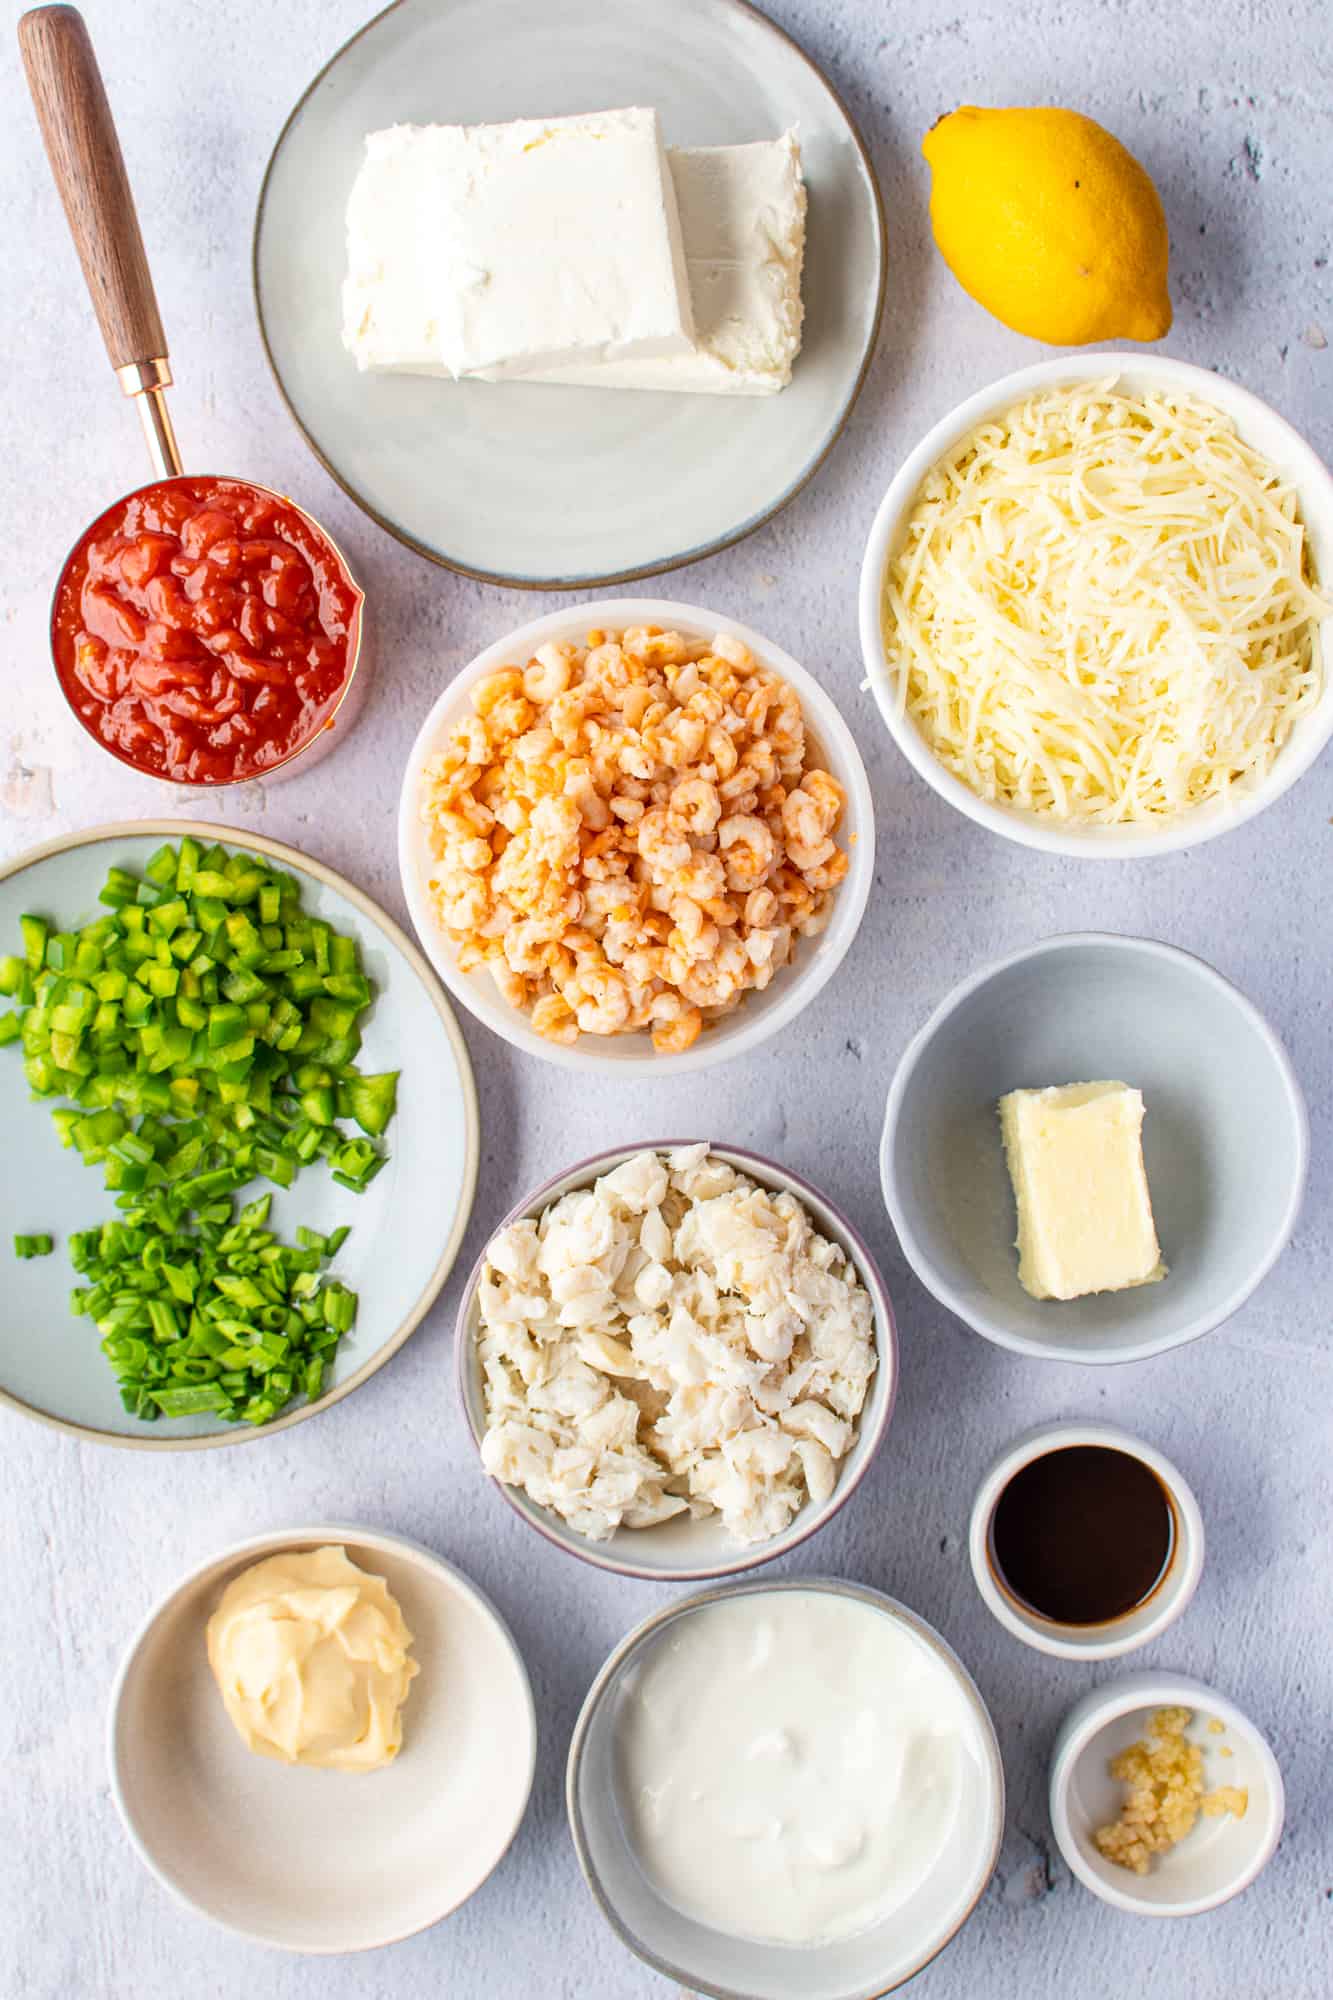 cream cheese, sour cream, mayonnaise, unsalted butter, Worcestershire sauce, a fresh lemon, minced garlic, cocktail sauce, lump crab meat, tiny shrimp, shredded Mozzarella cheese, sliced green onions, diced green pepper.